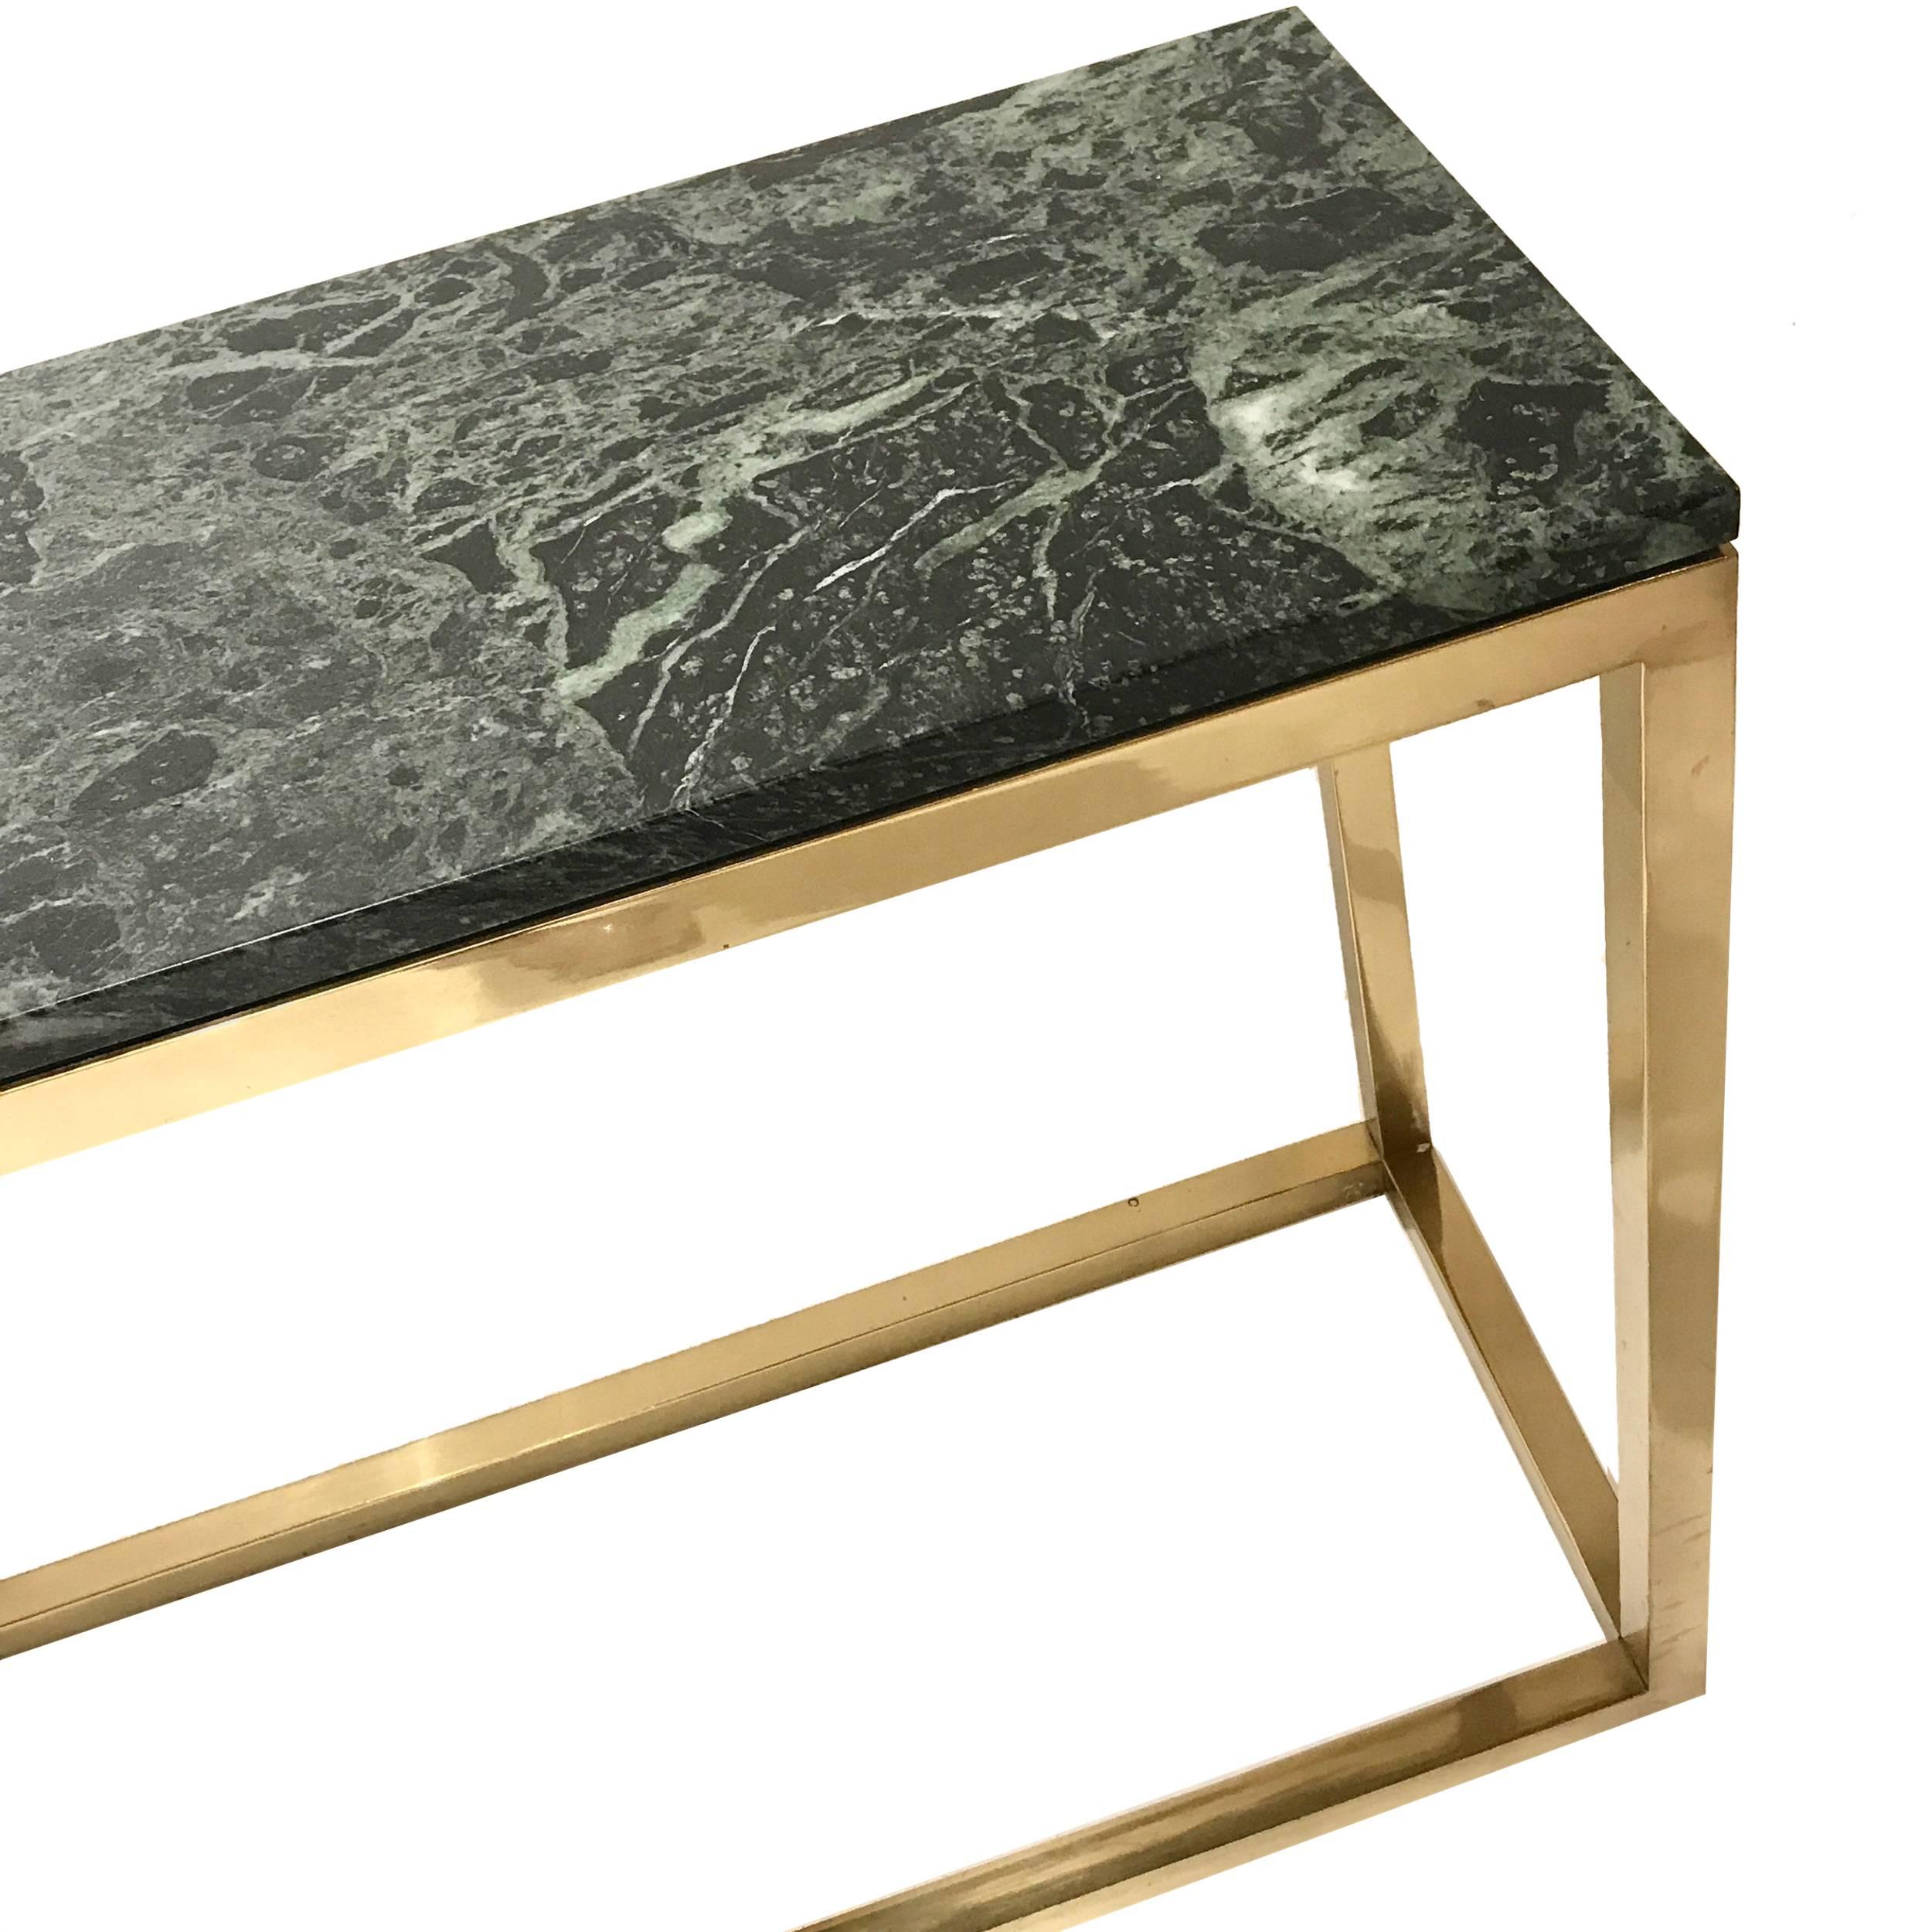 Stunning green marble with gorgeous veining set on a brass frame base.